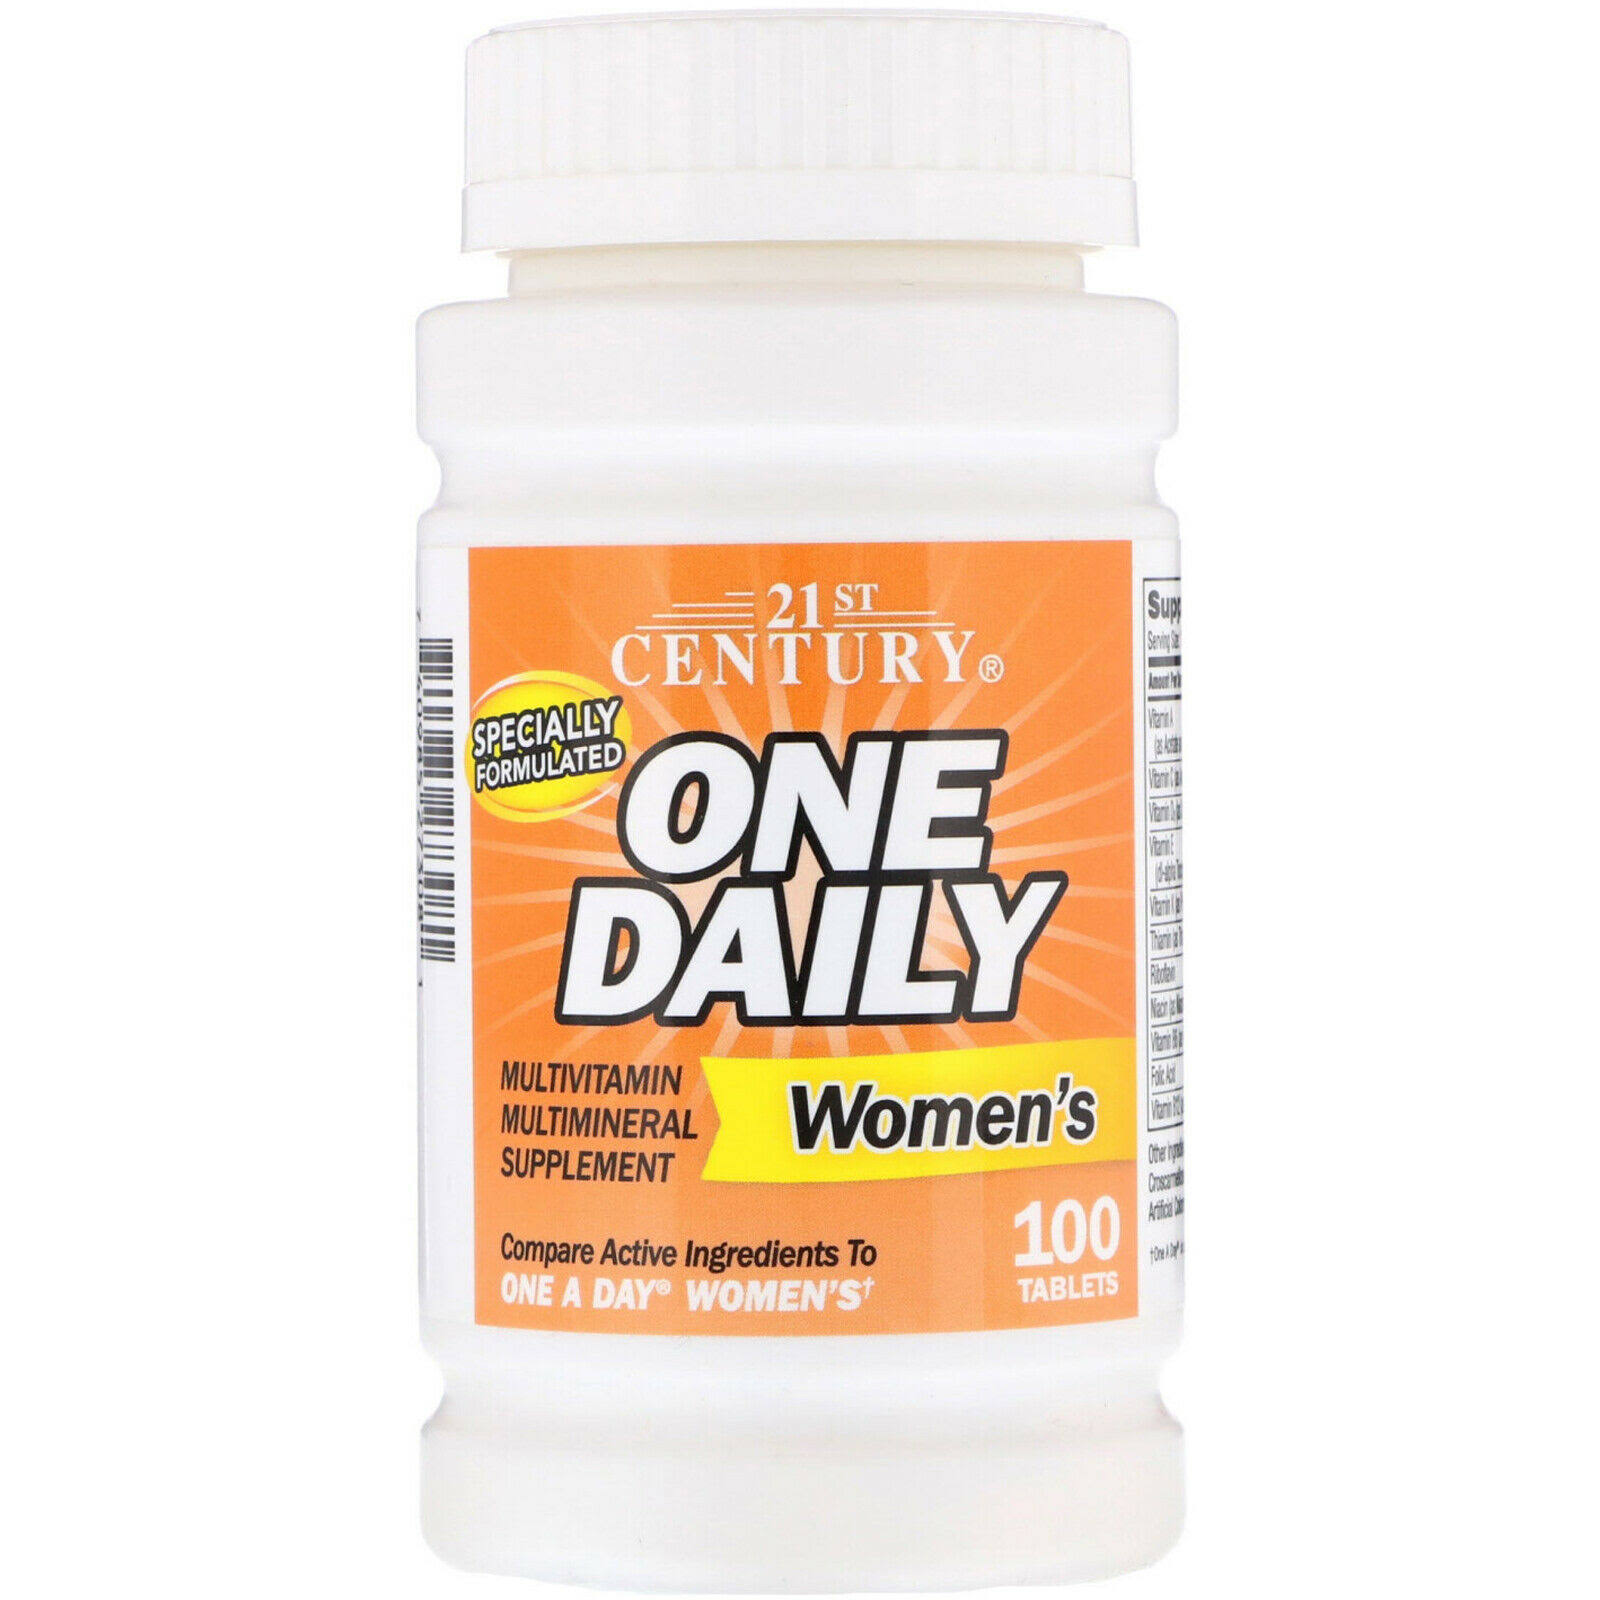 21st Century One Daily Women's Tablets - 100ct